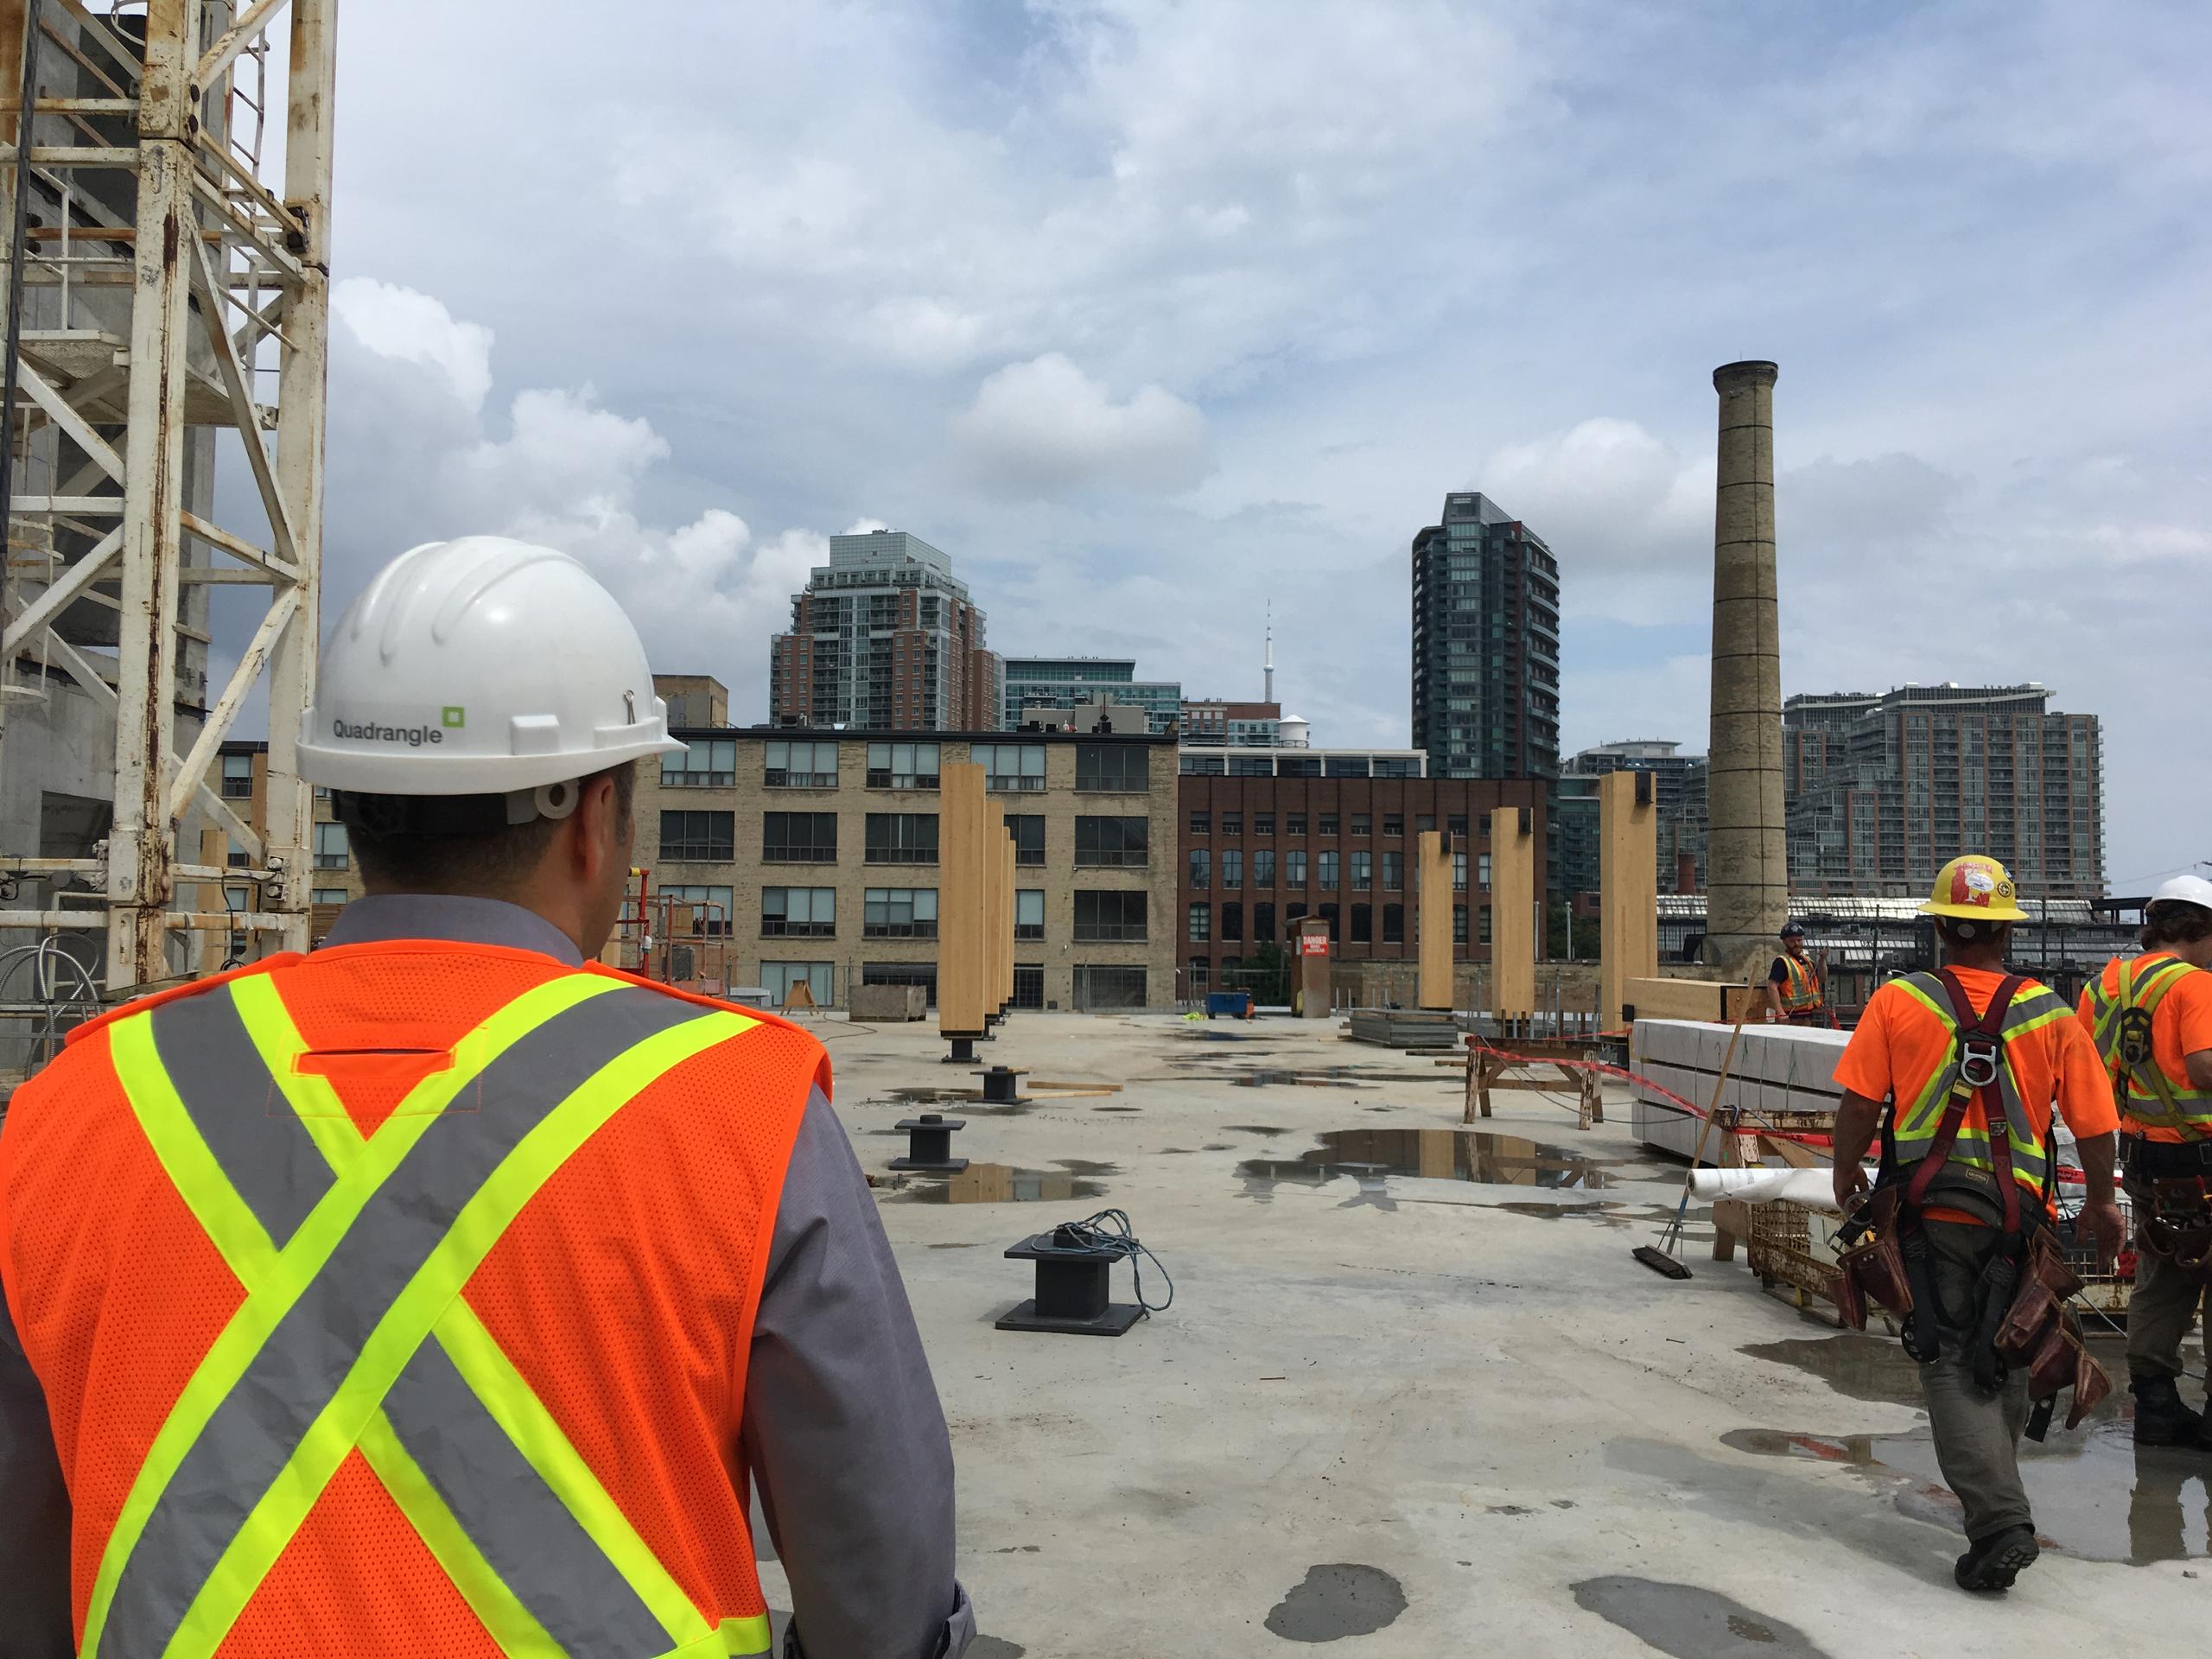 Richard Witt seen from behind wearing safety vest and Quadrangle branded hard hat in the foreground on site at 80 Atlantic looking at upright glulam columns and Liberty Village condos and heritage smokestack in the distance